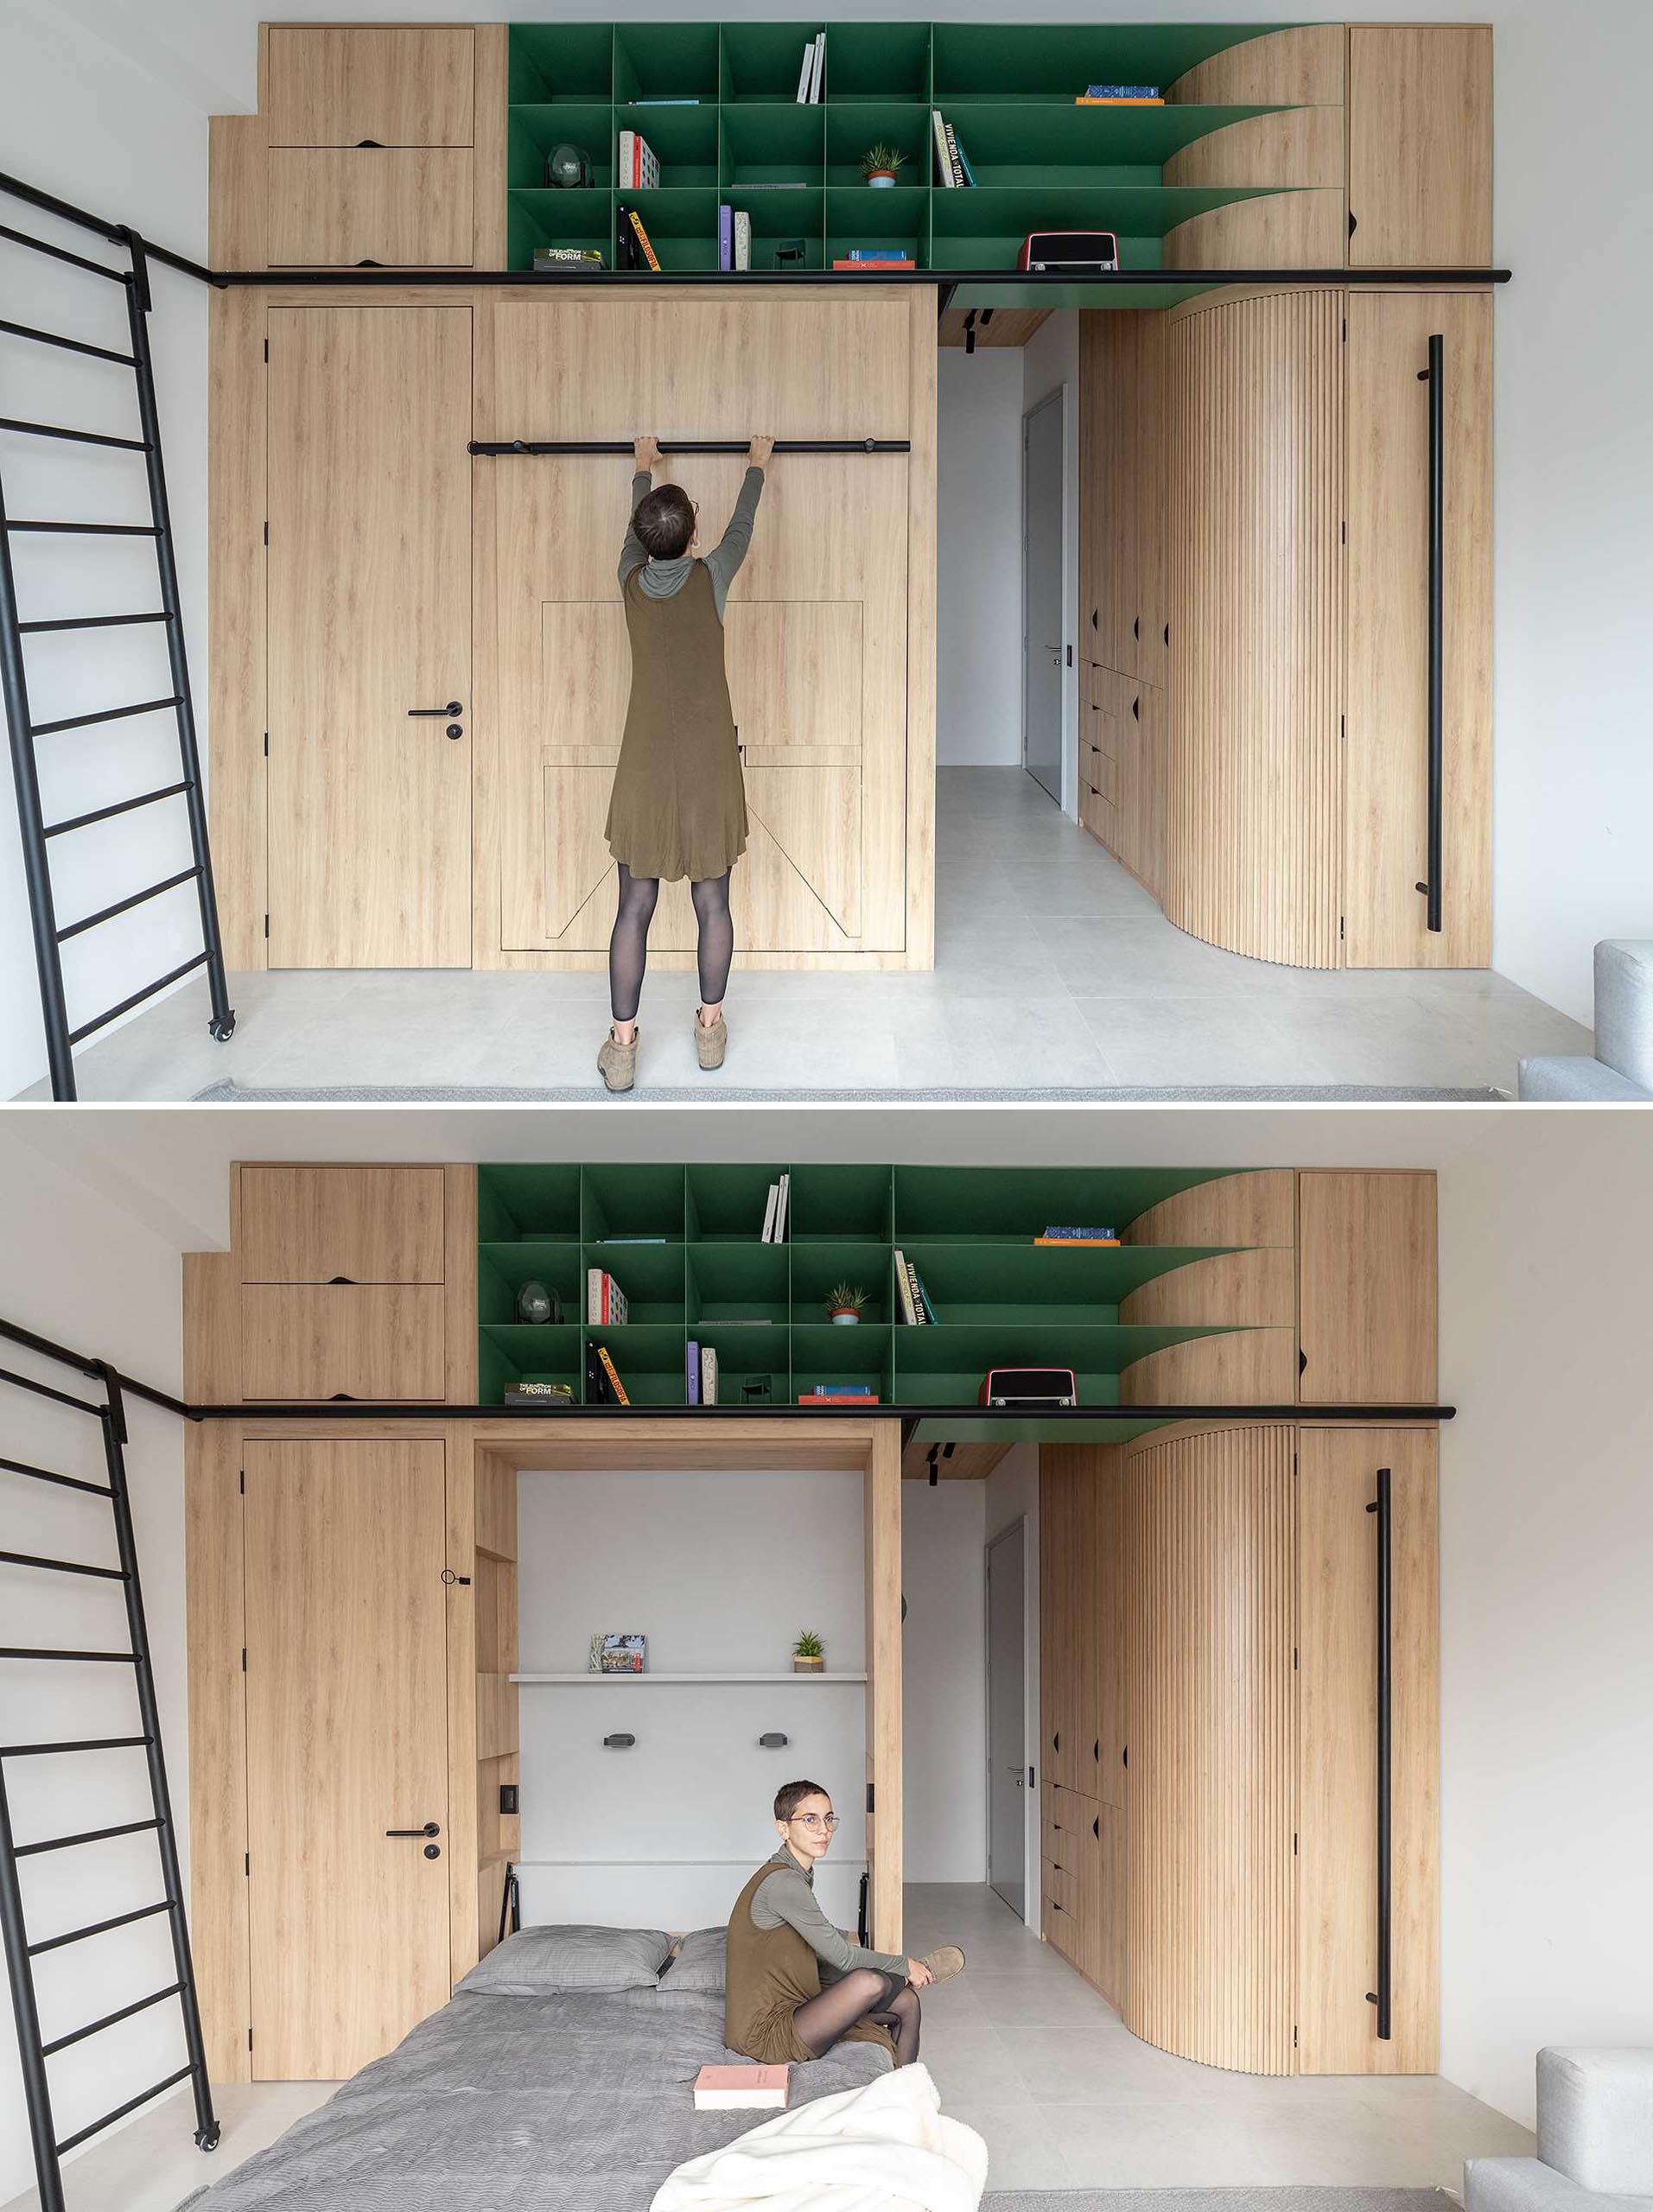 The minimalist wood cabinets in this studio apartment include a variety of hidden features, like a fold down bed. Once lowered, shelves behind and to the side of the bed are revealed.